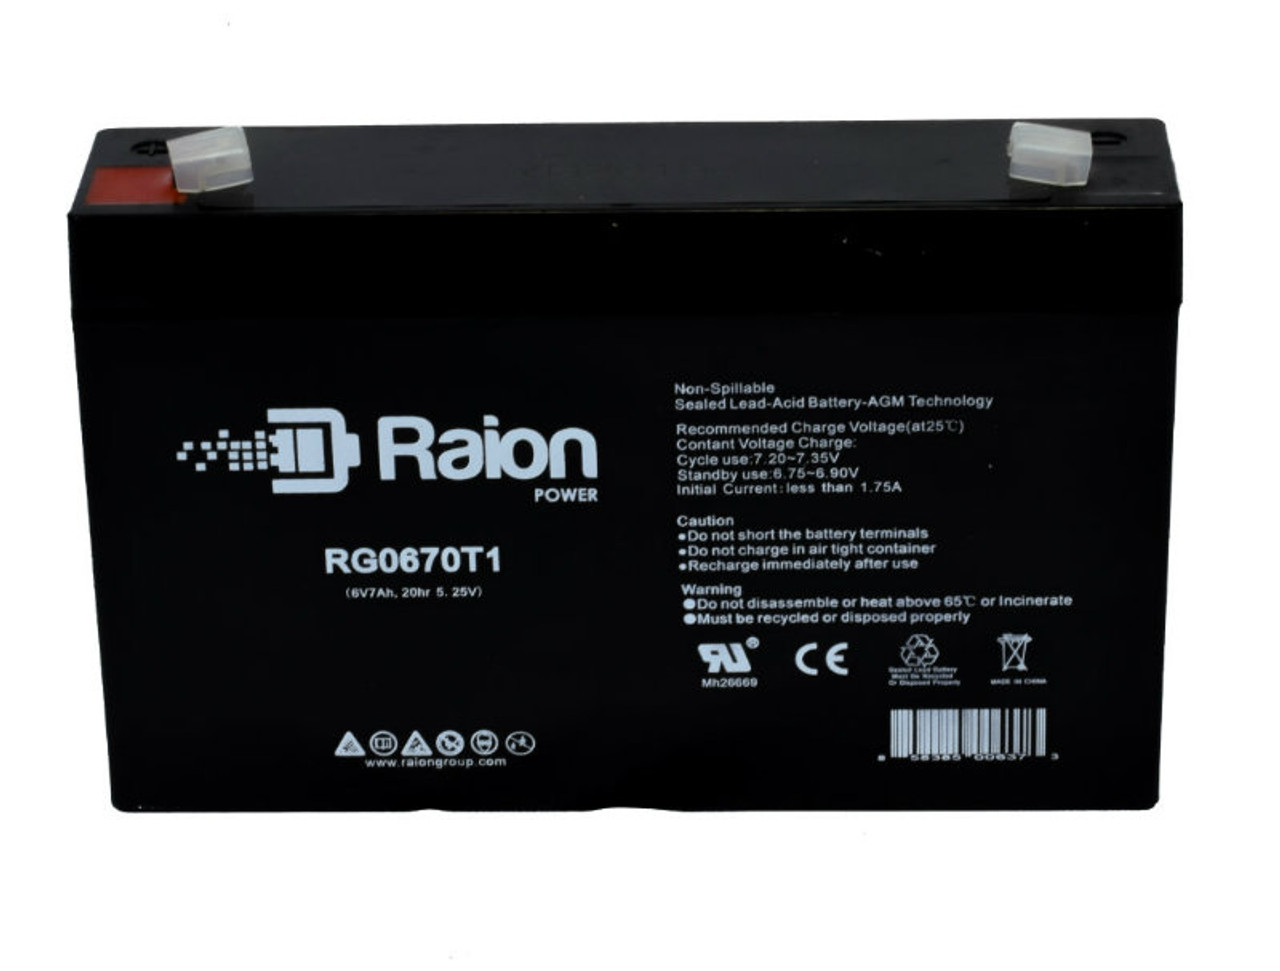 Raion Power RG0670T1 Replacement Battery Cartridge for Emergi-Lite UH24